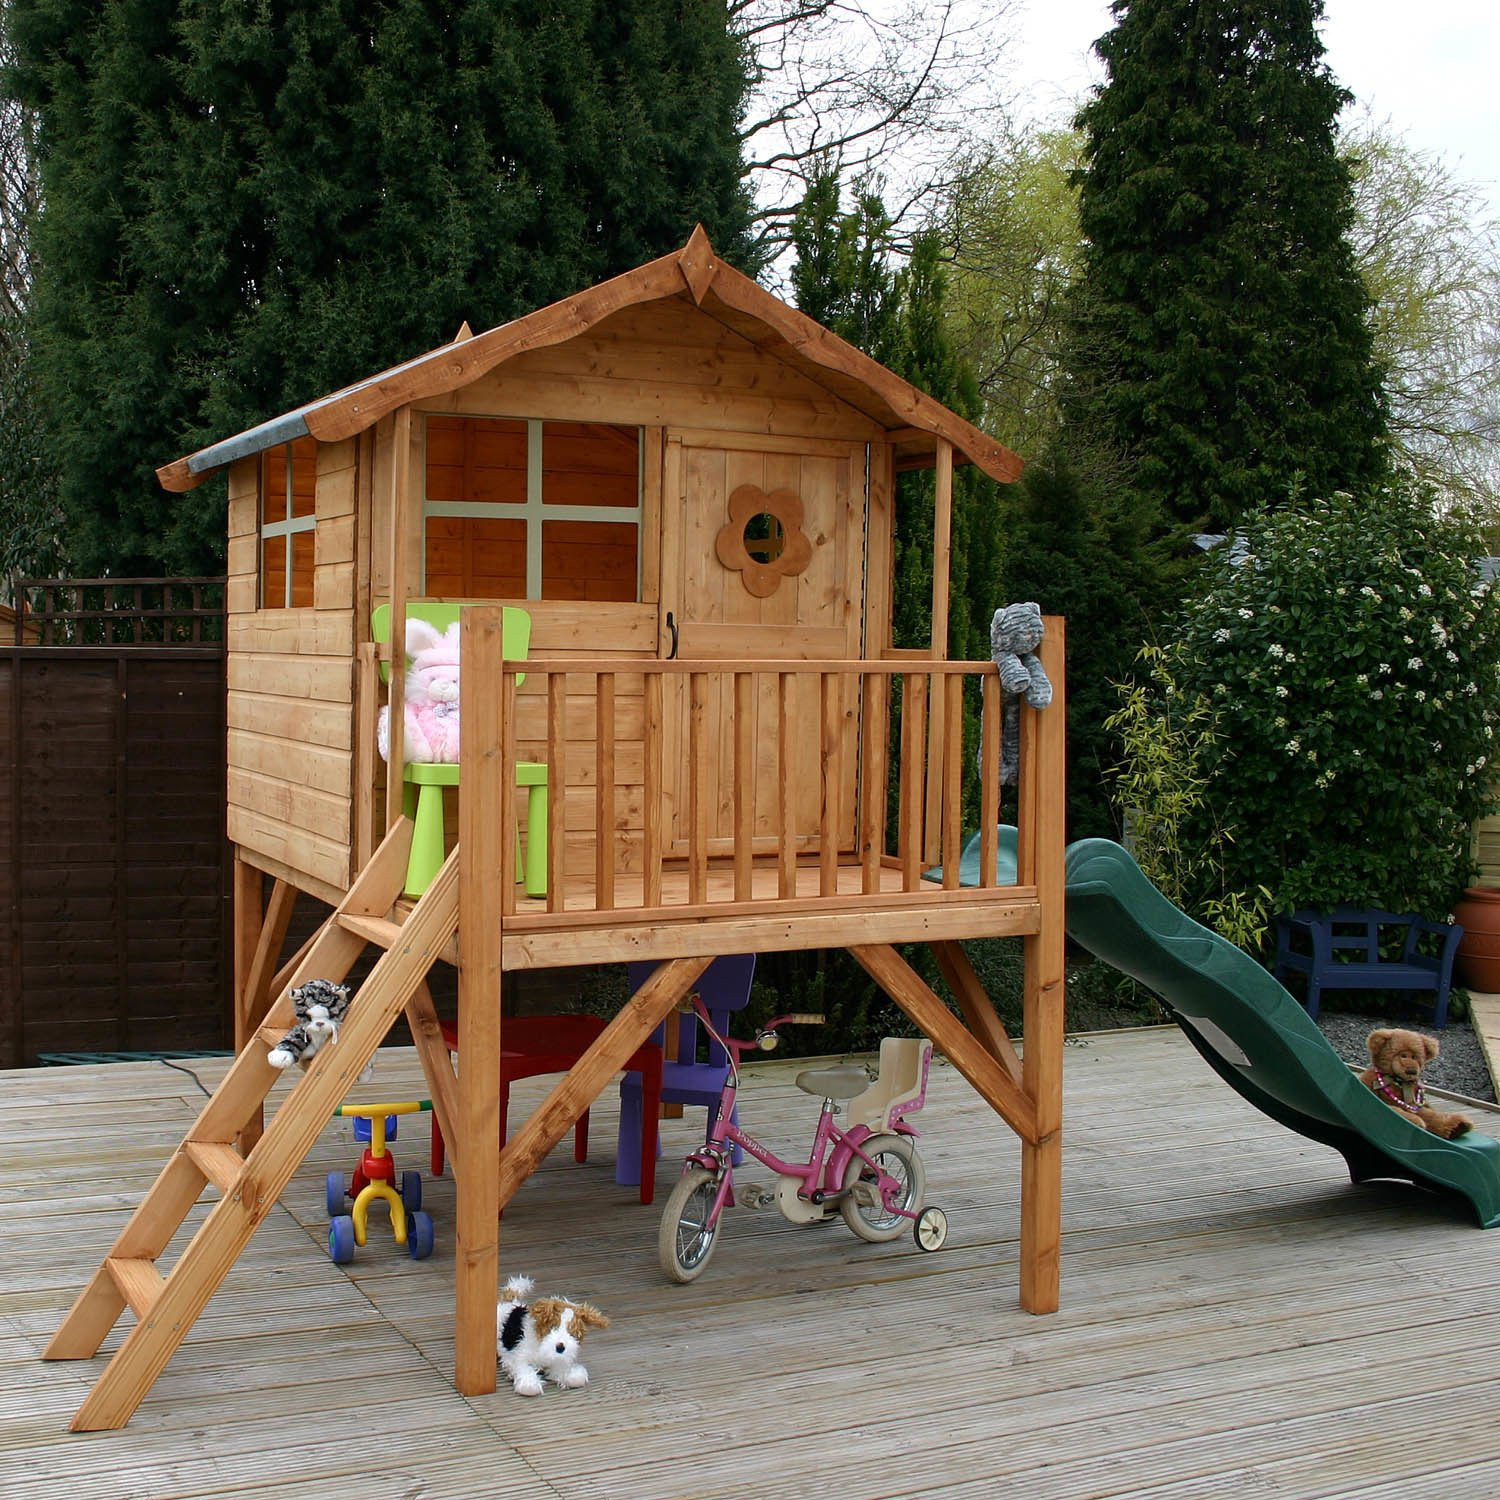 Kids Playhouse With Swing
 5 x 5 Wooden Tulip Playhouse Tower with Slide